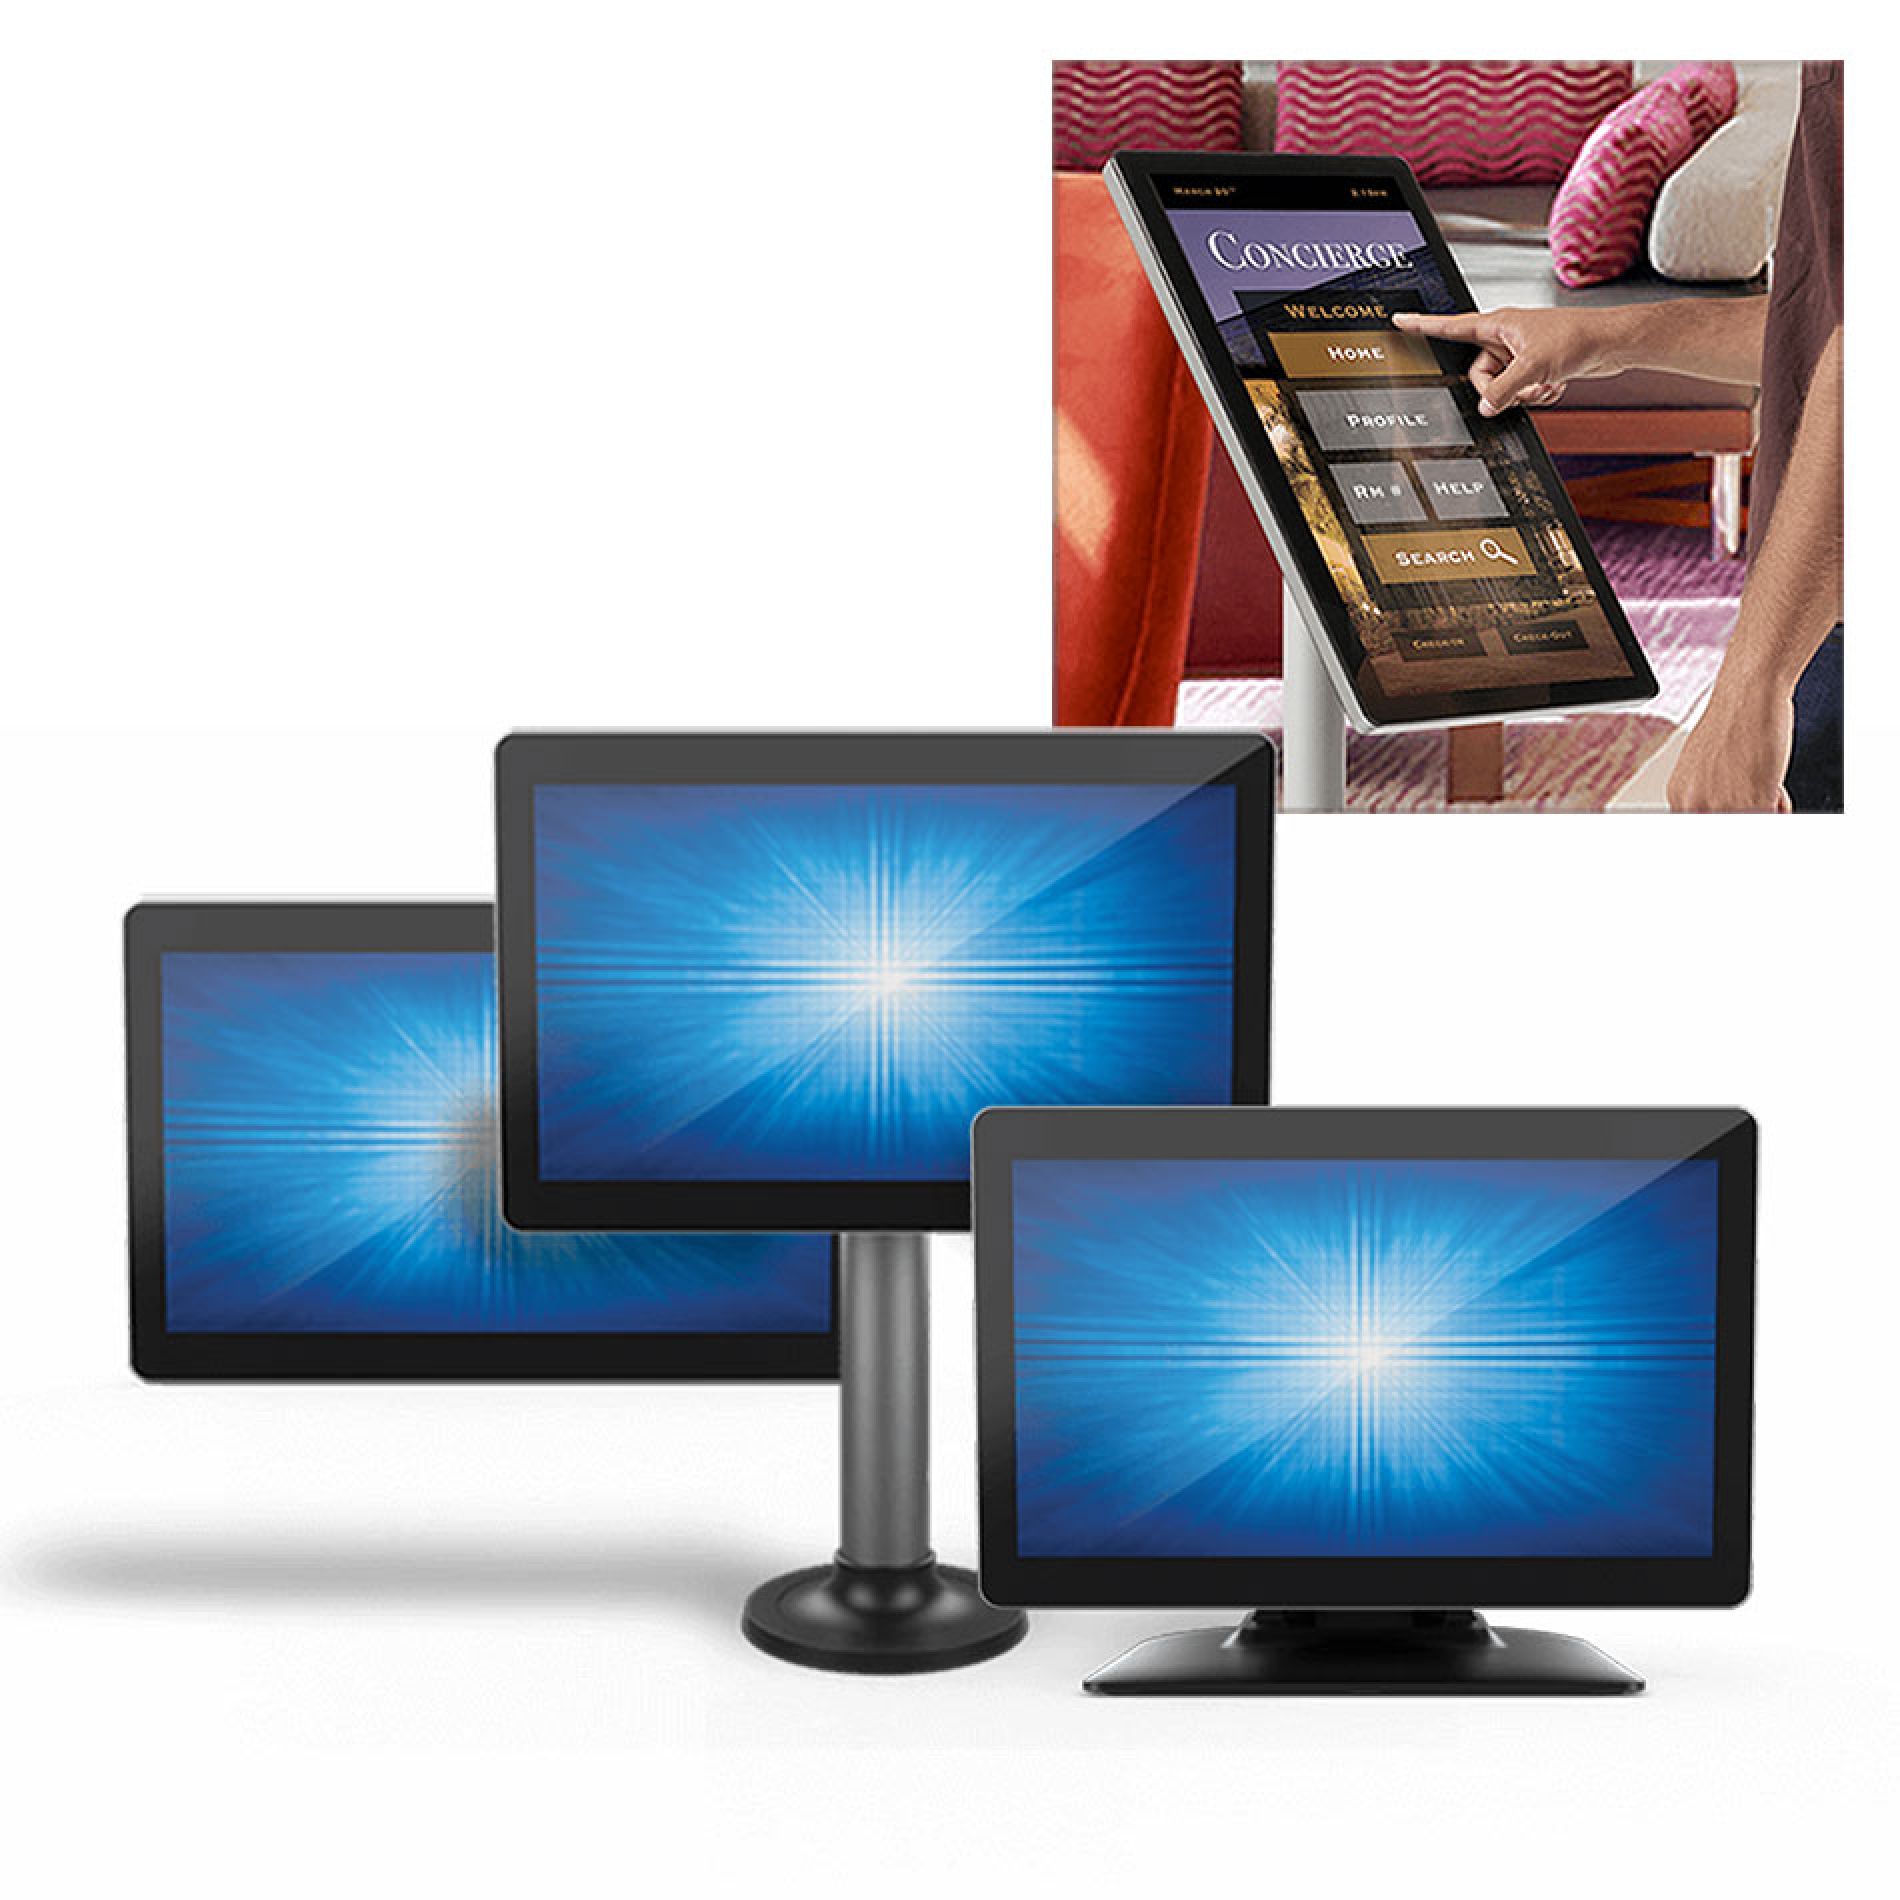 Touchscreen Monitors Gallery Image